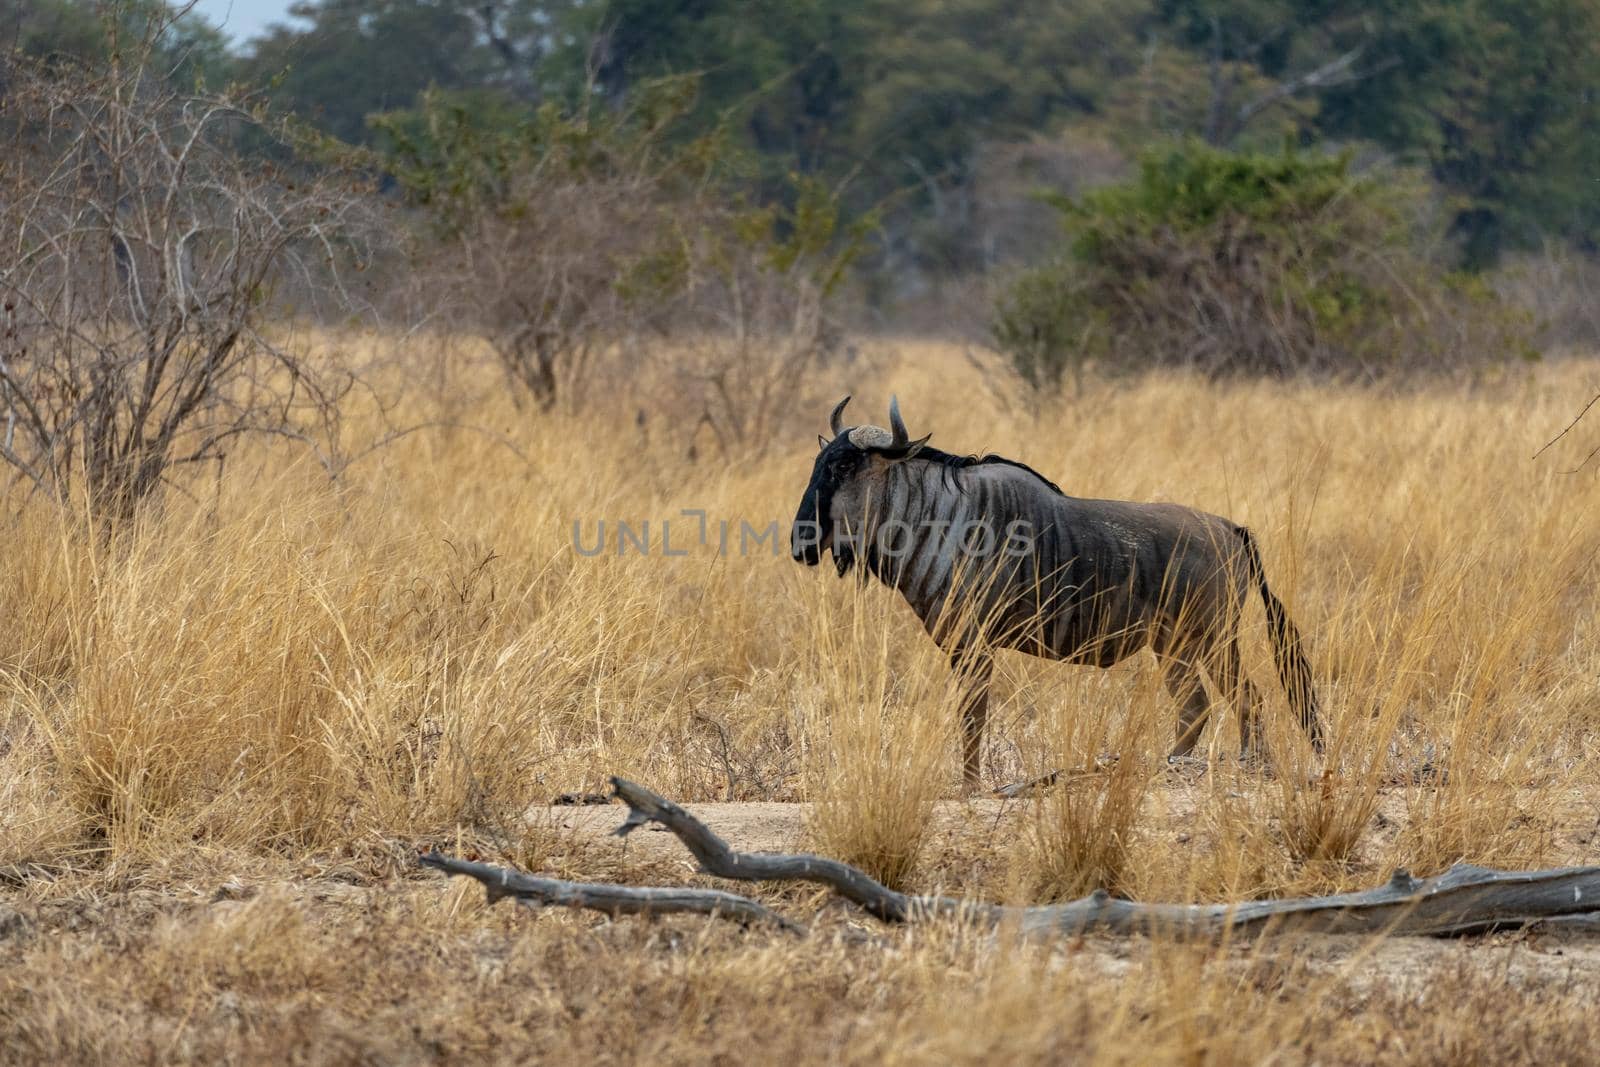 An amazing close up of a isolated wildebeest moving in the bush